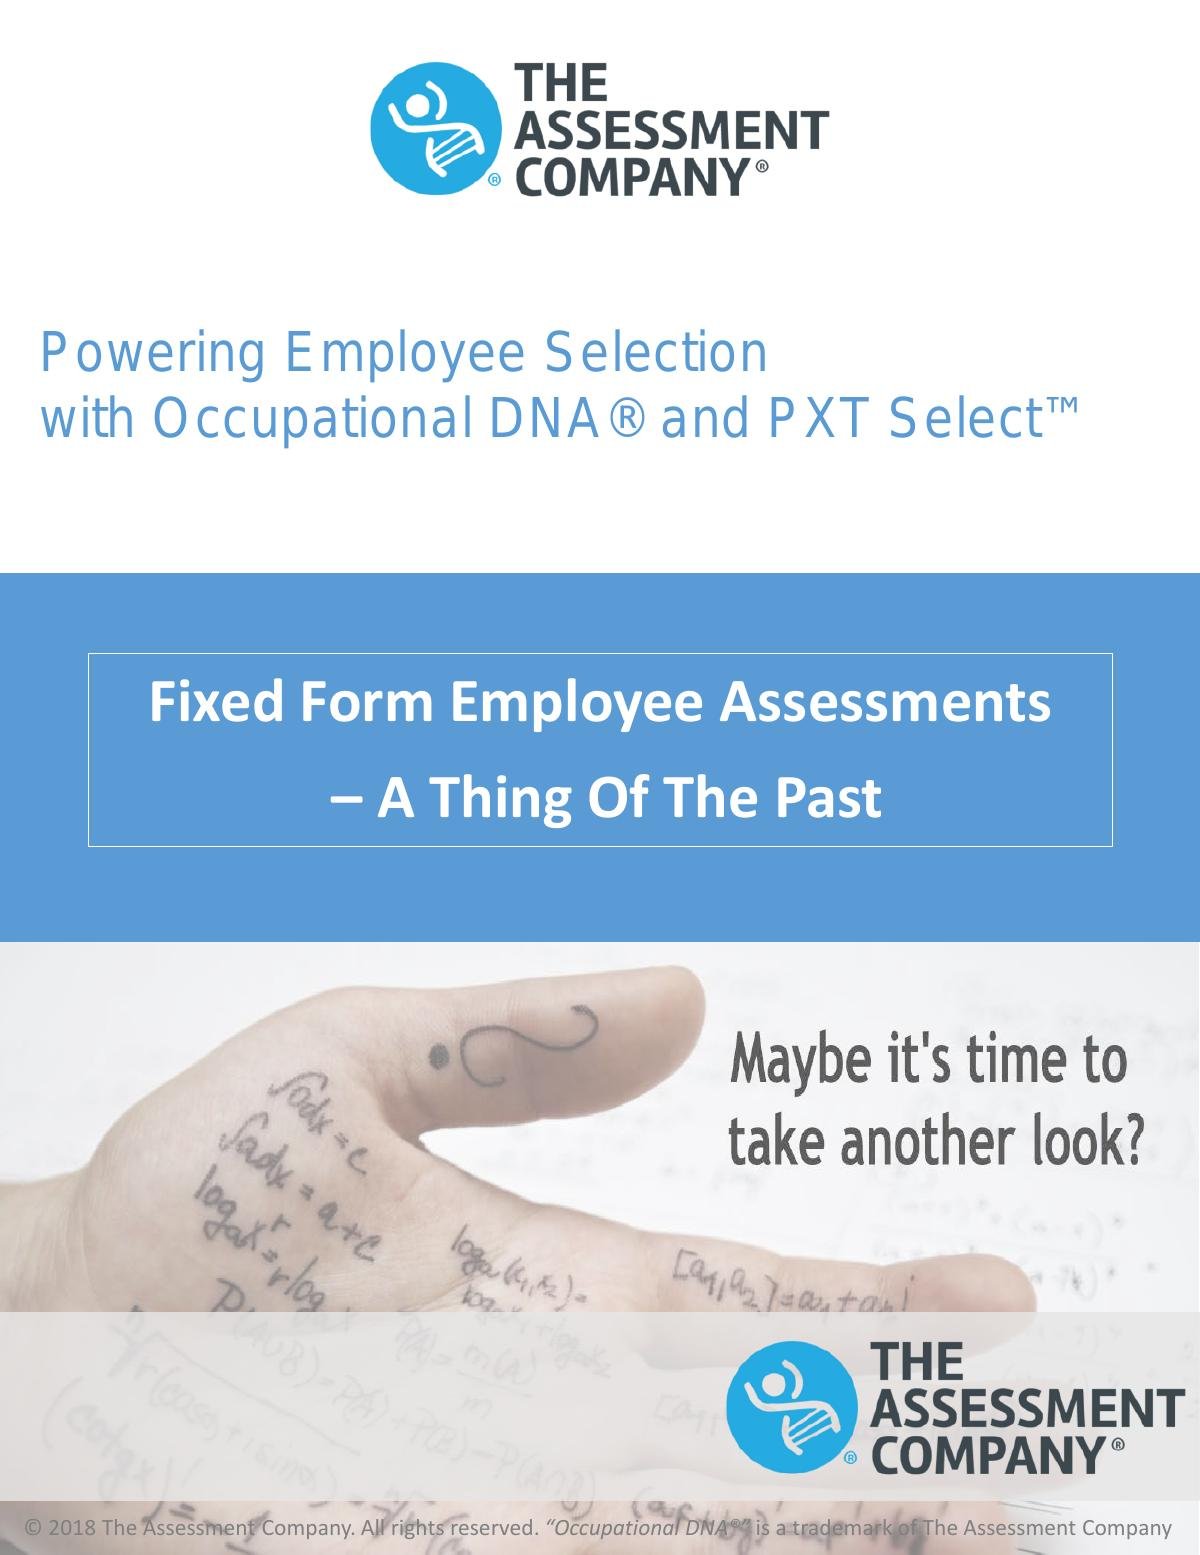 Fixed Form Employee Assessments –A Thing Of The Past